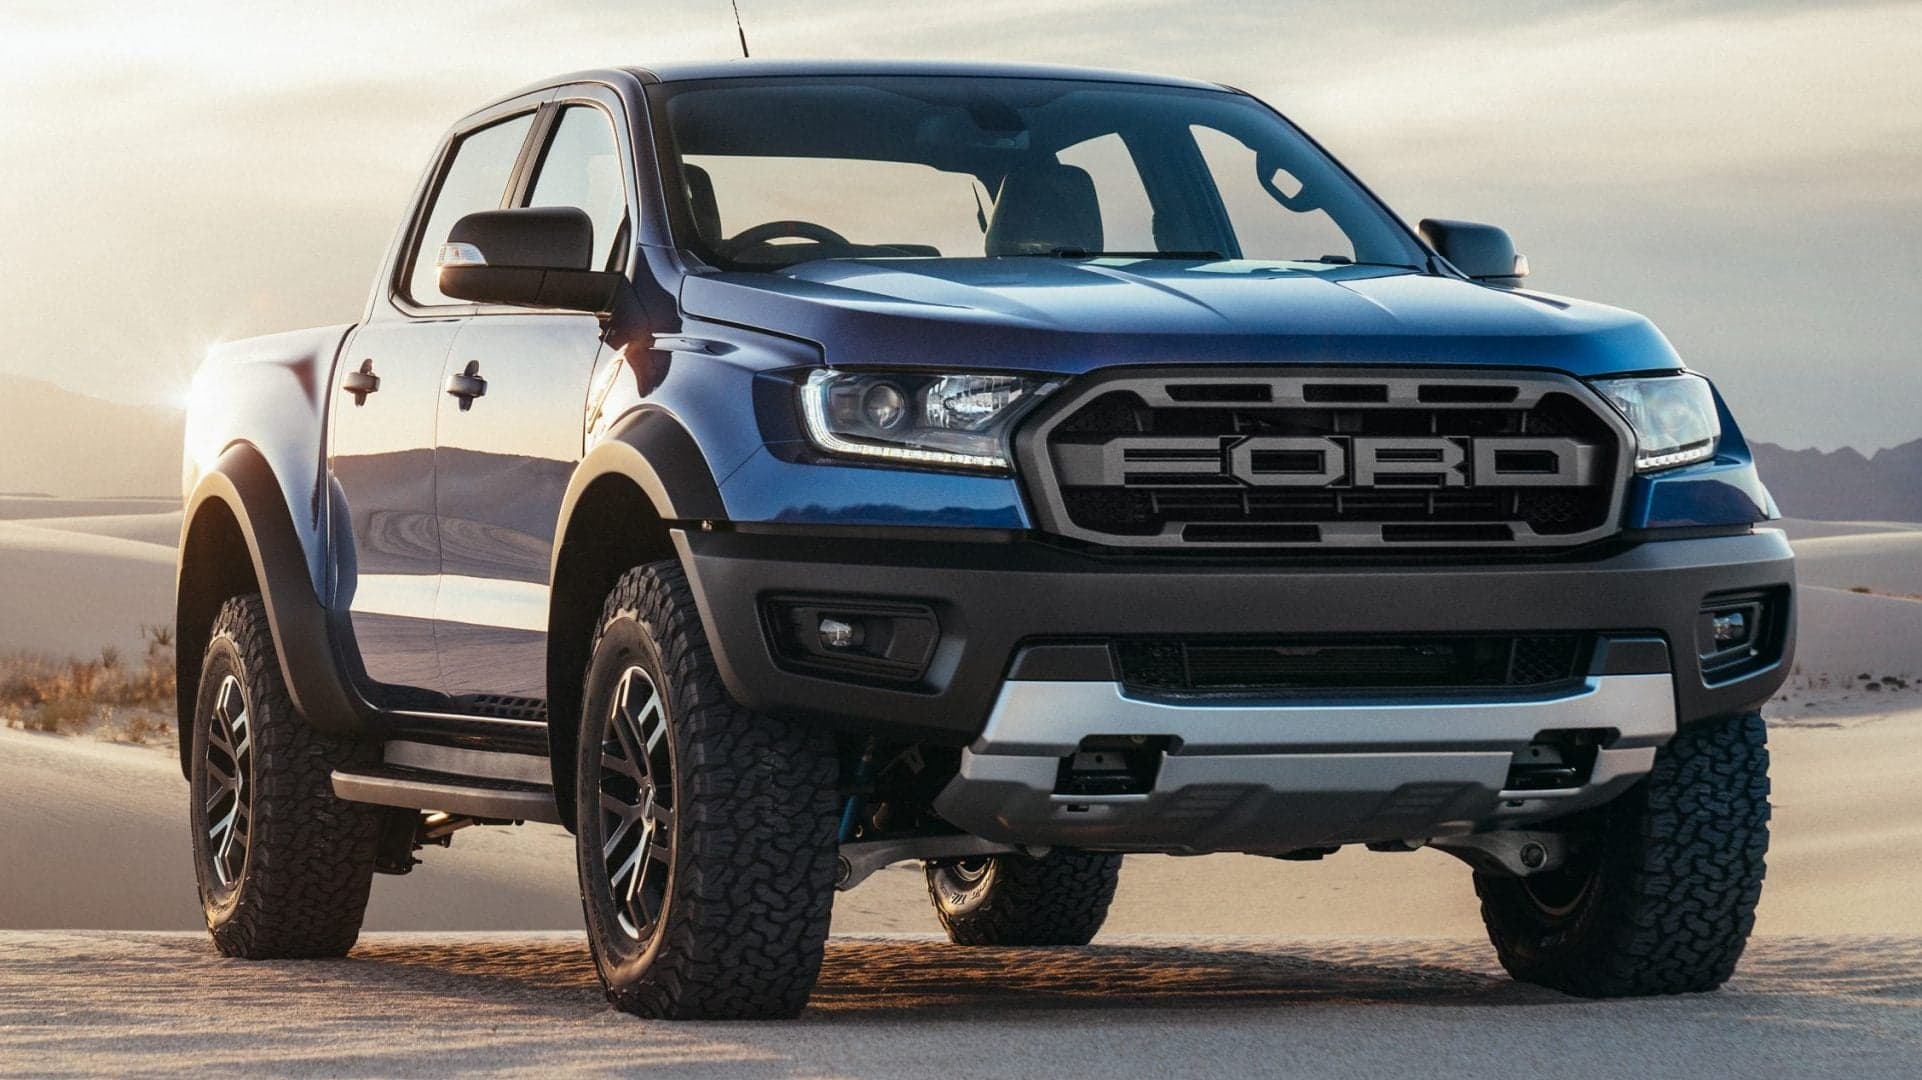 How Much Might the Ford Ranger Raptor Cost in the U.S.?